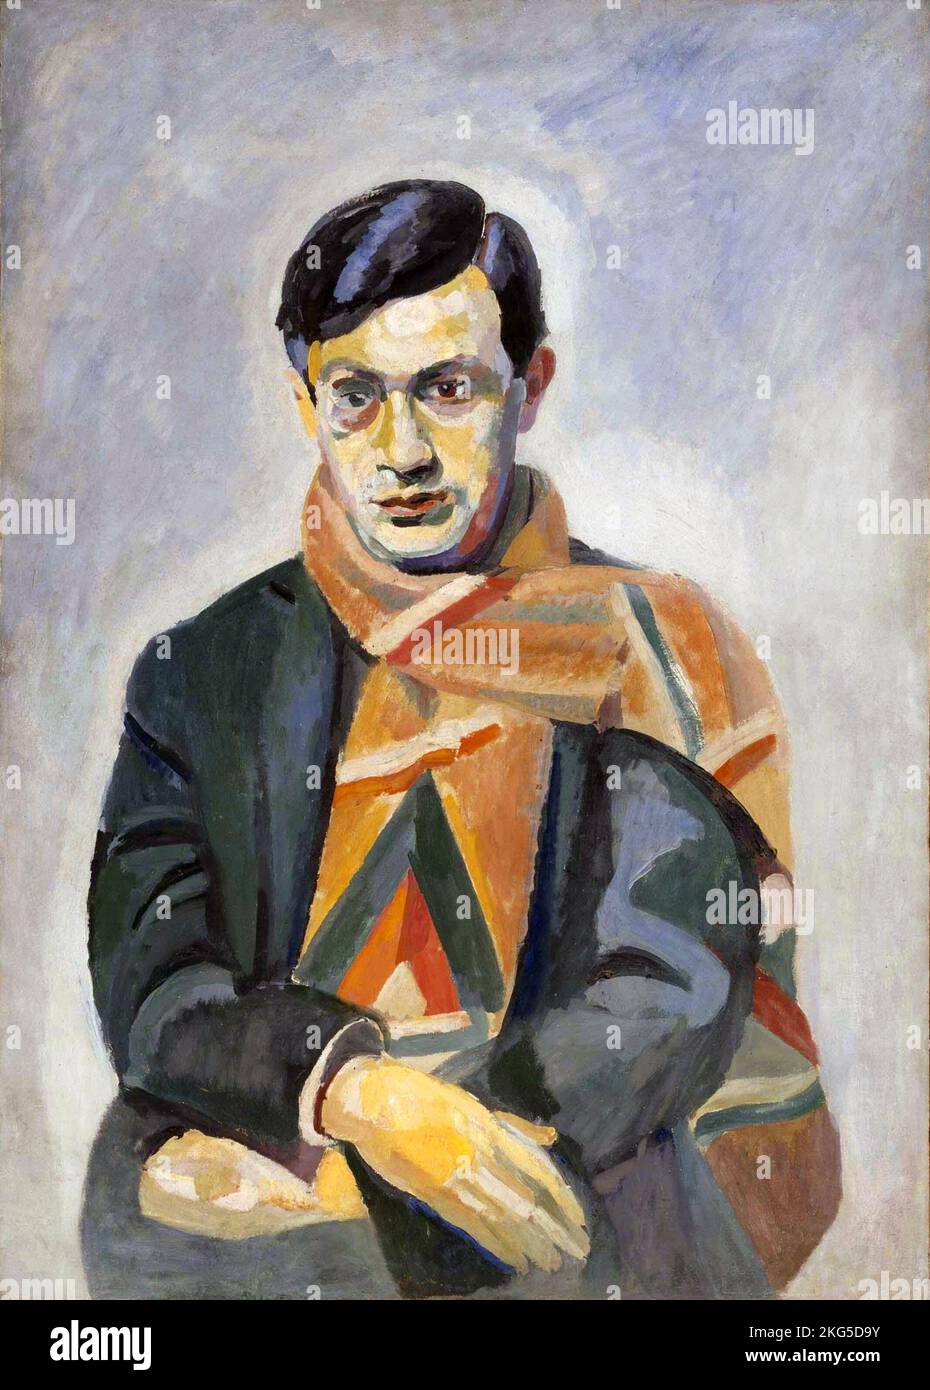 Tristan Tzara (1896 – 1963) Romanian and French avant-garde poet, essayist and performance artist. Painting of Tzara, 1923, by Robert Delaunay Stock Photo